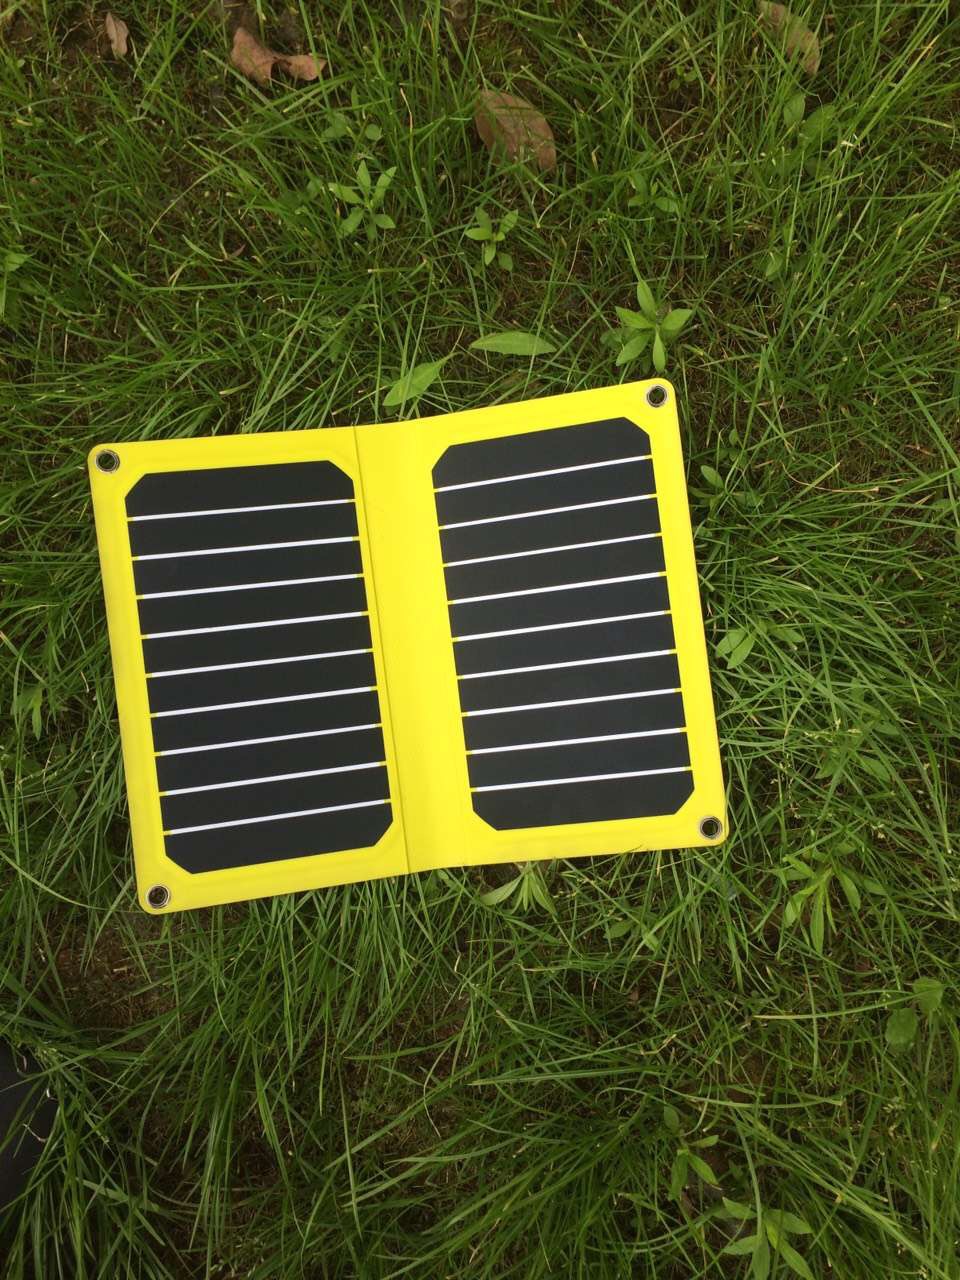 CLPSC-1602 PORTABLE SOLAR CHARGER